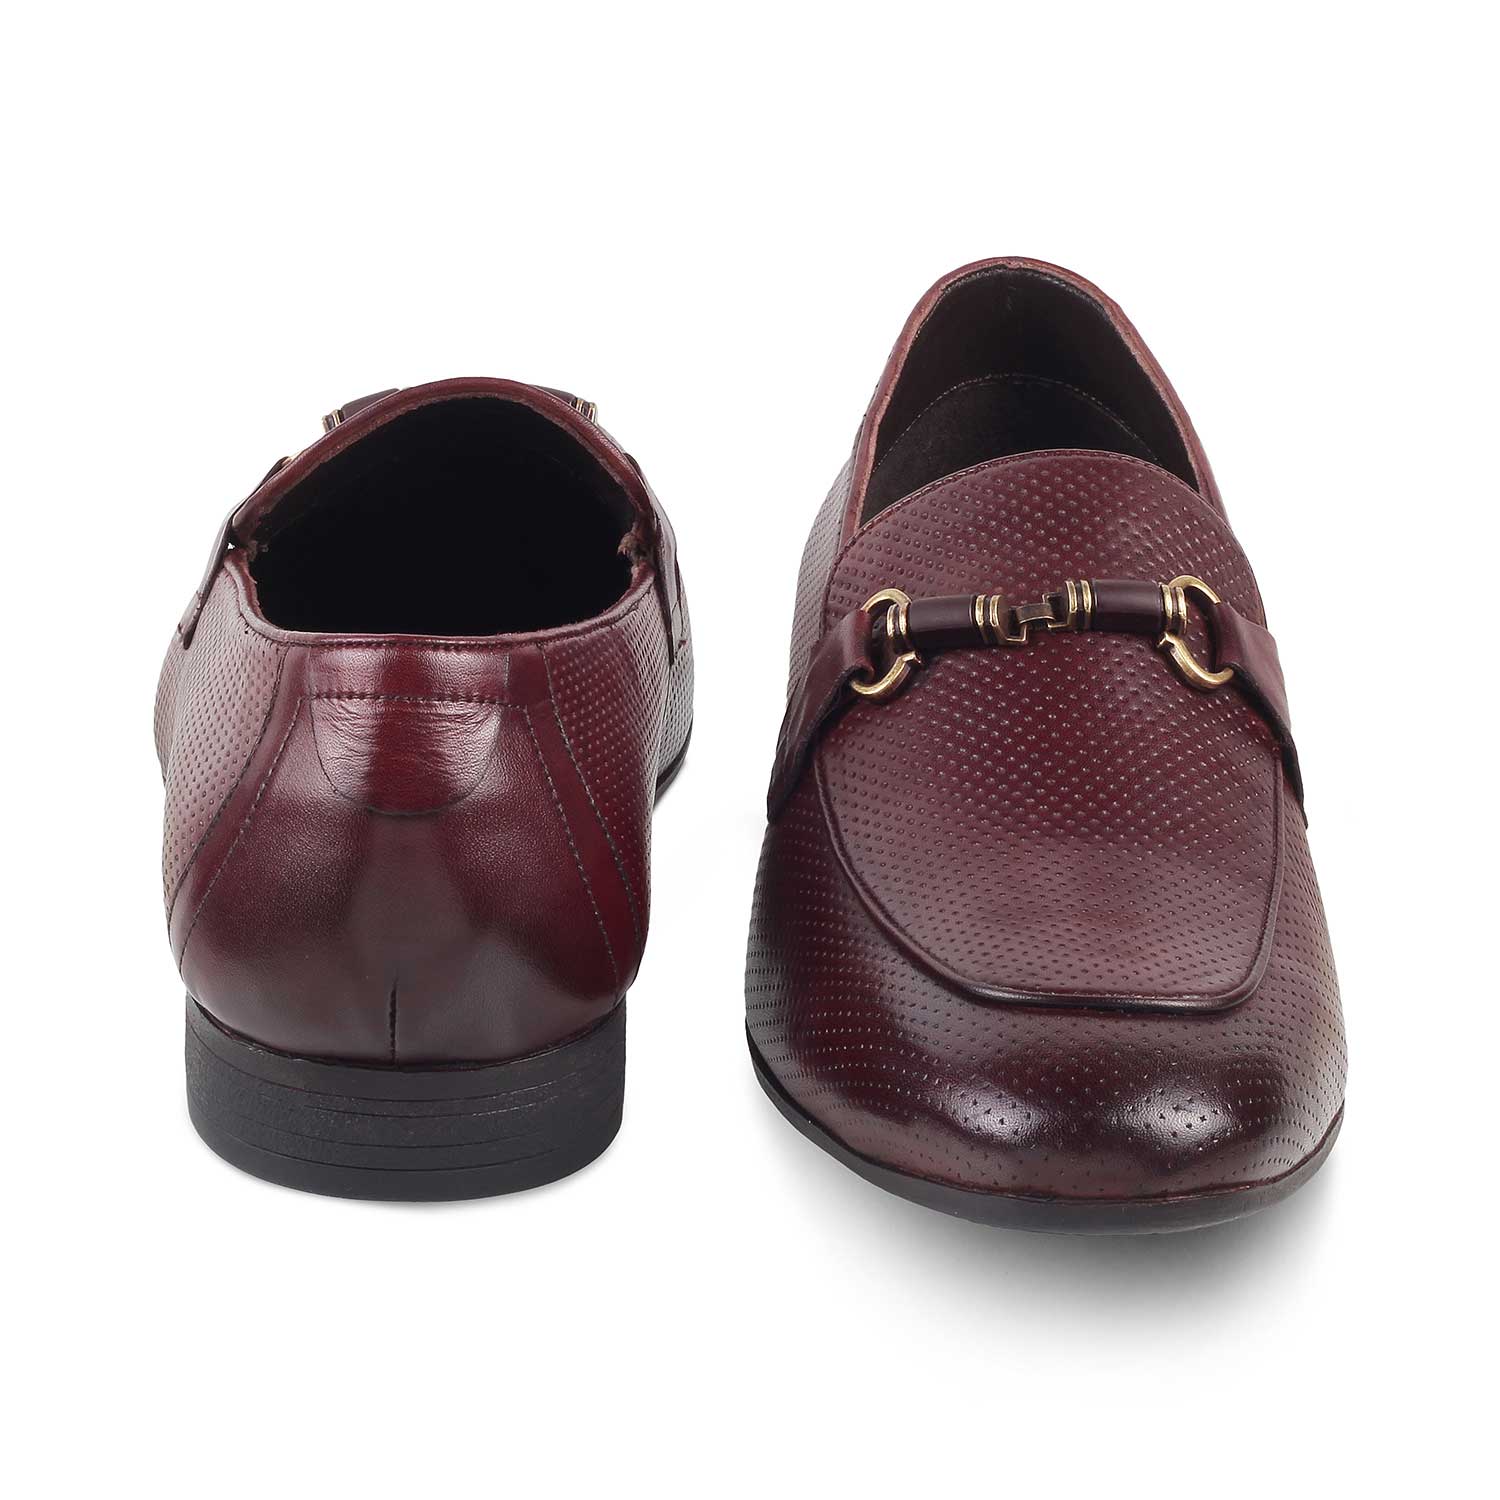 Acubuck Wine Men's Leather Loafers Online at Tresmode.com